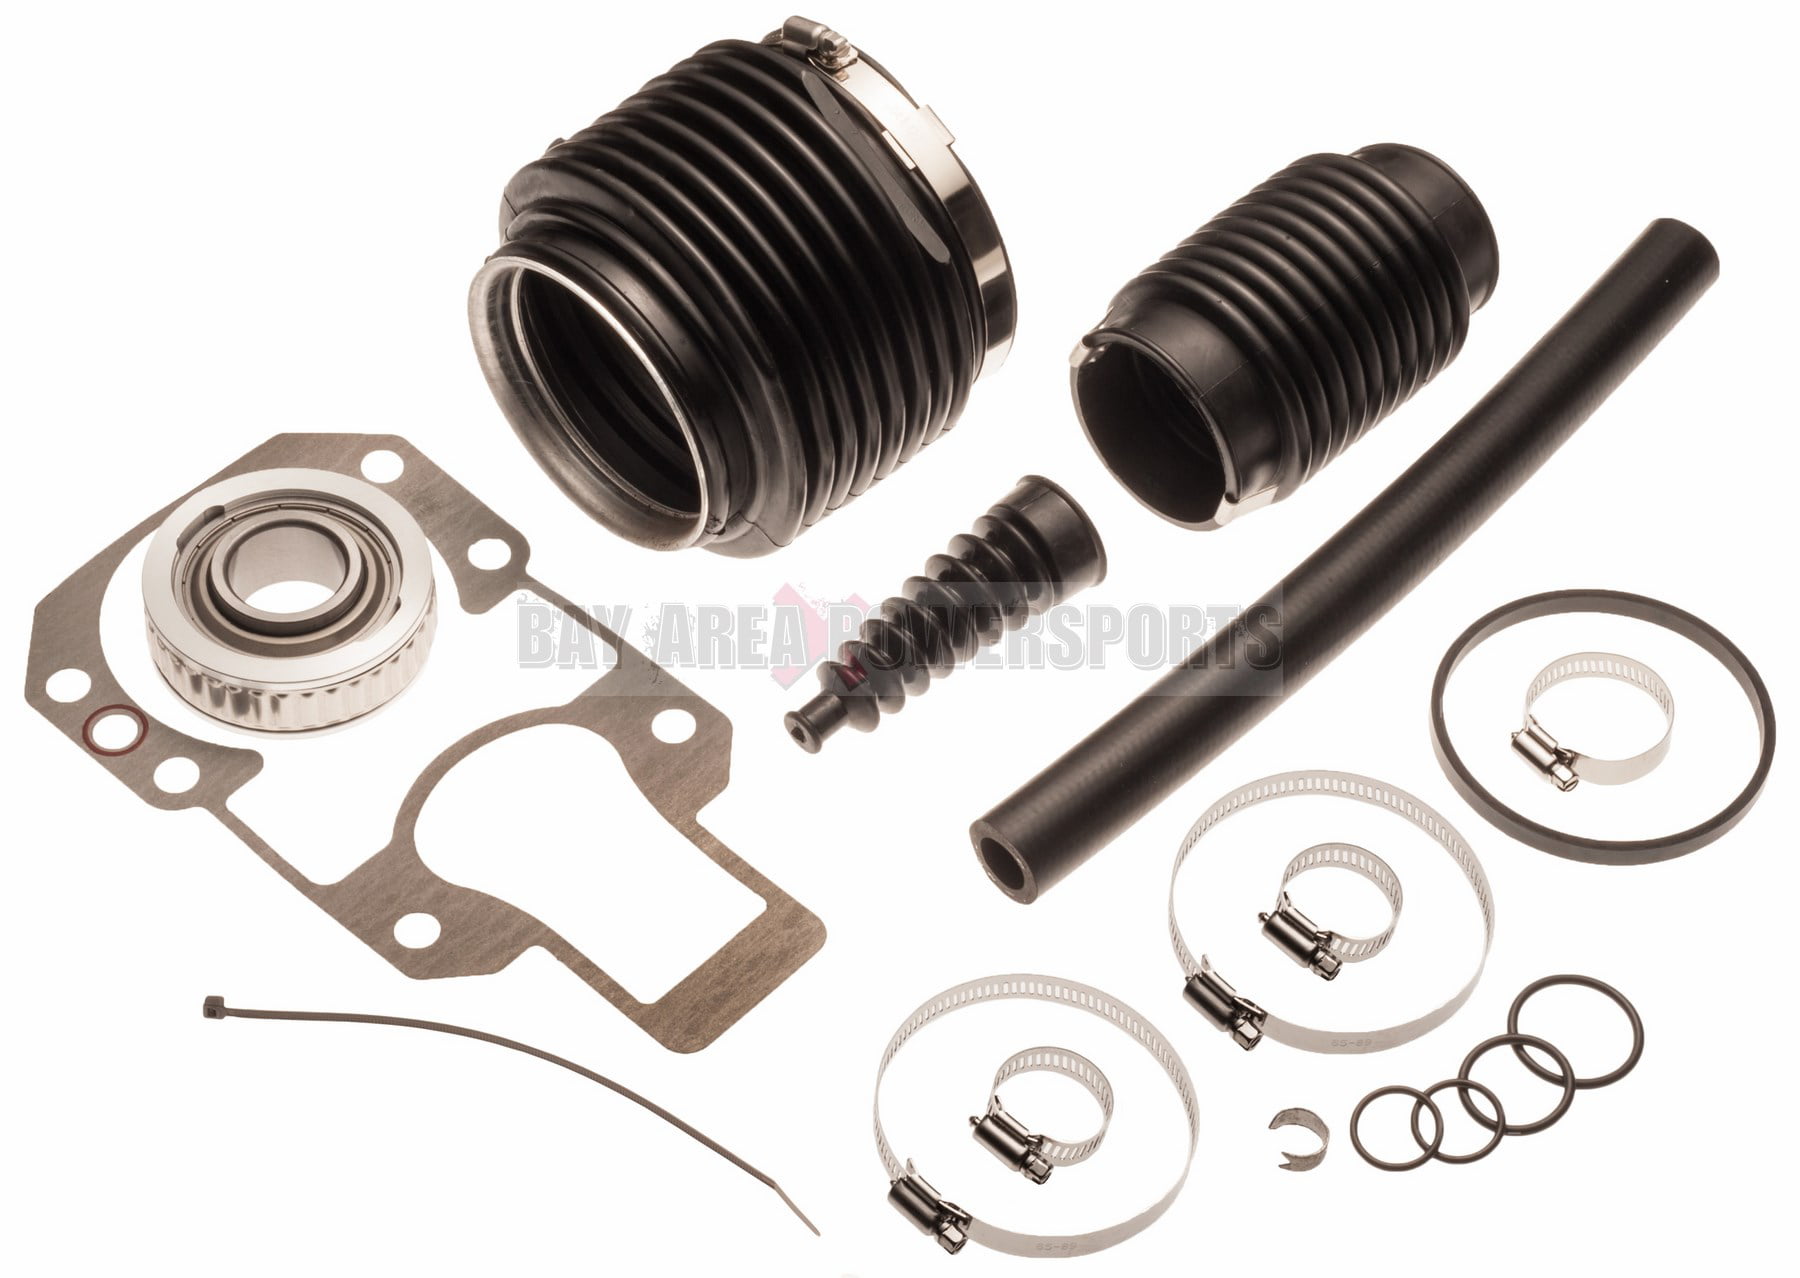 Replaces OE# 30-803099T1 Seal Bearing Bellows Kit Compatible with Mercruiser Alpha I Gen II Transom Bellows Repair/Reseal Kit 